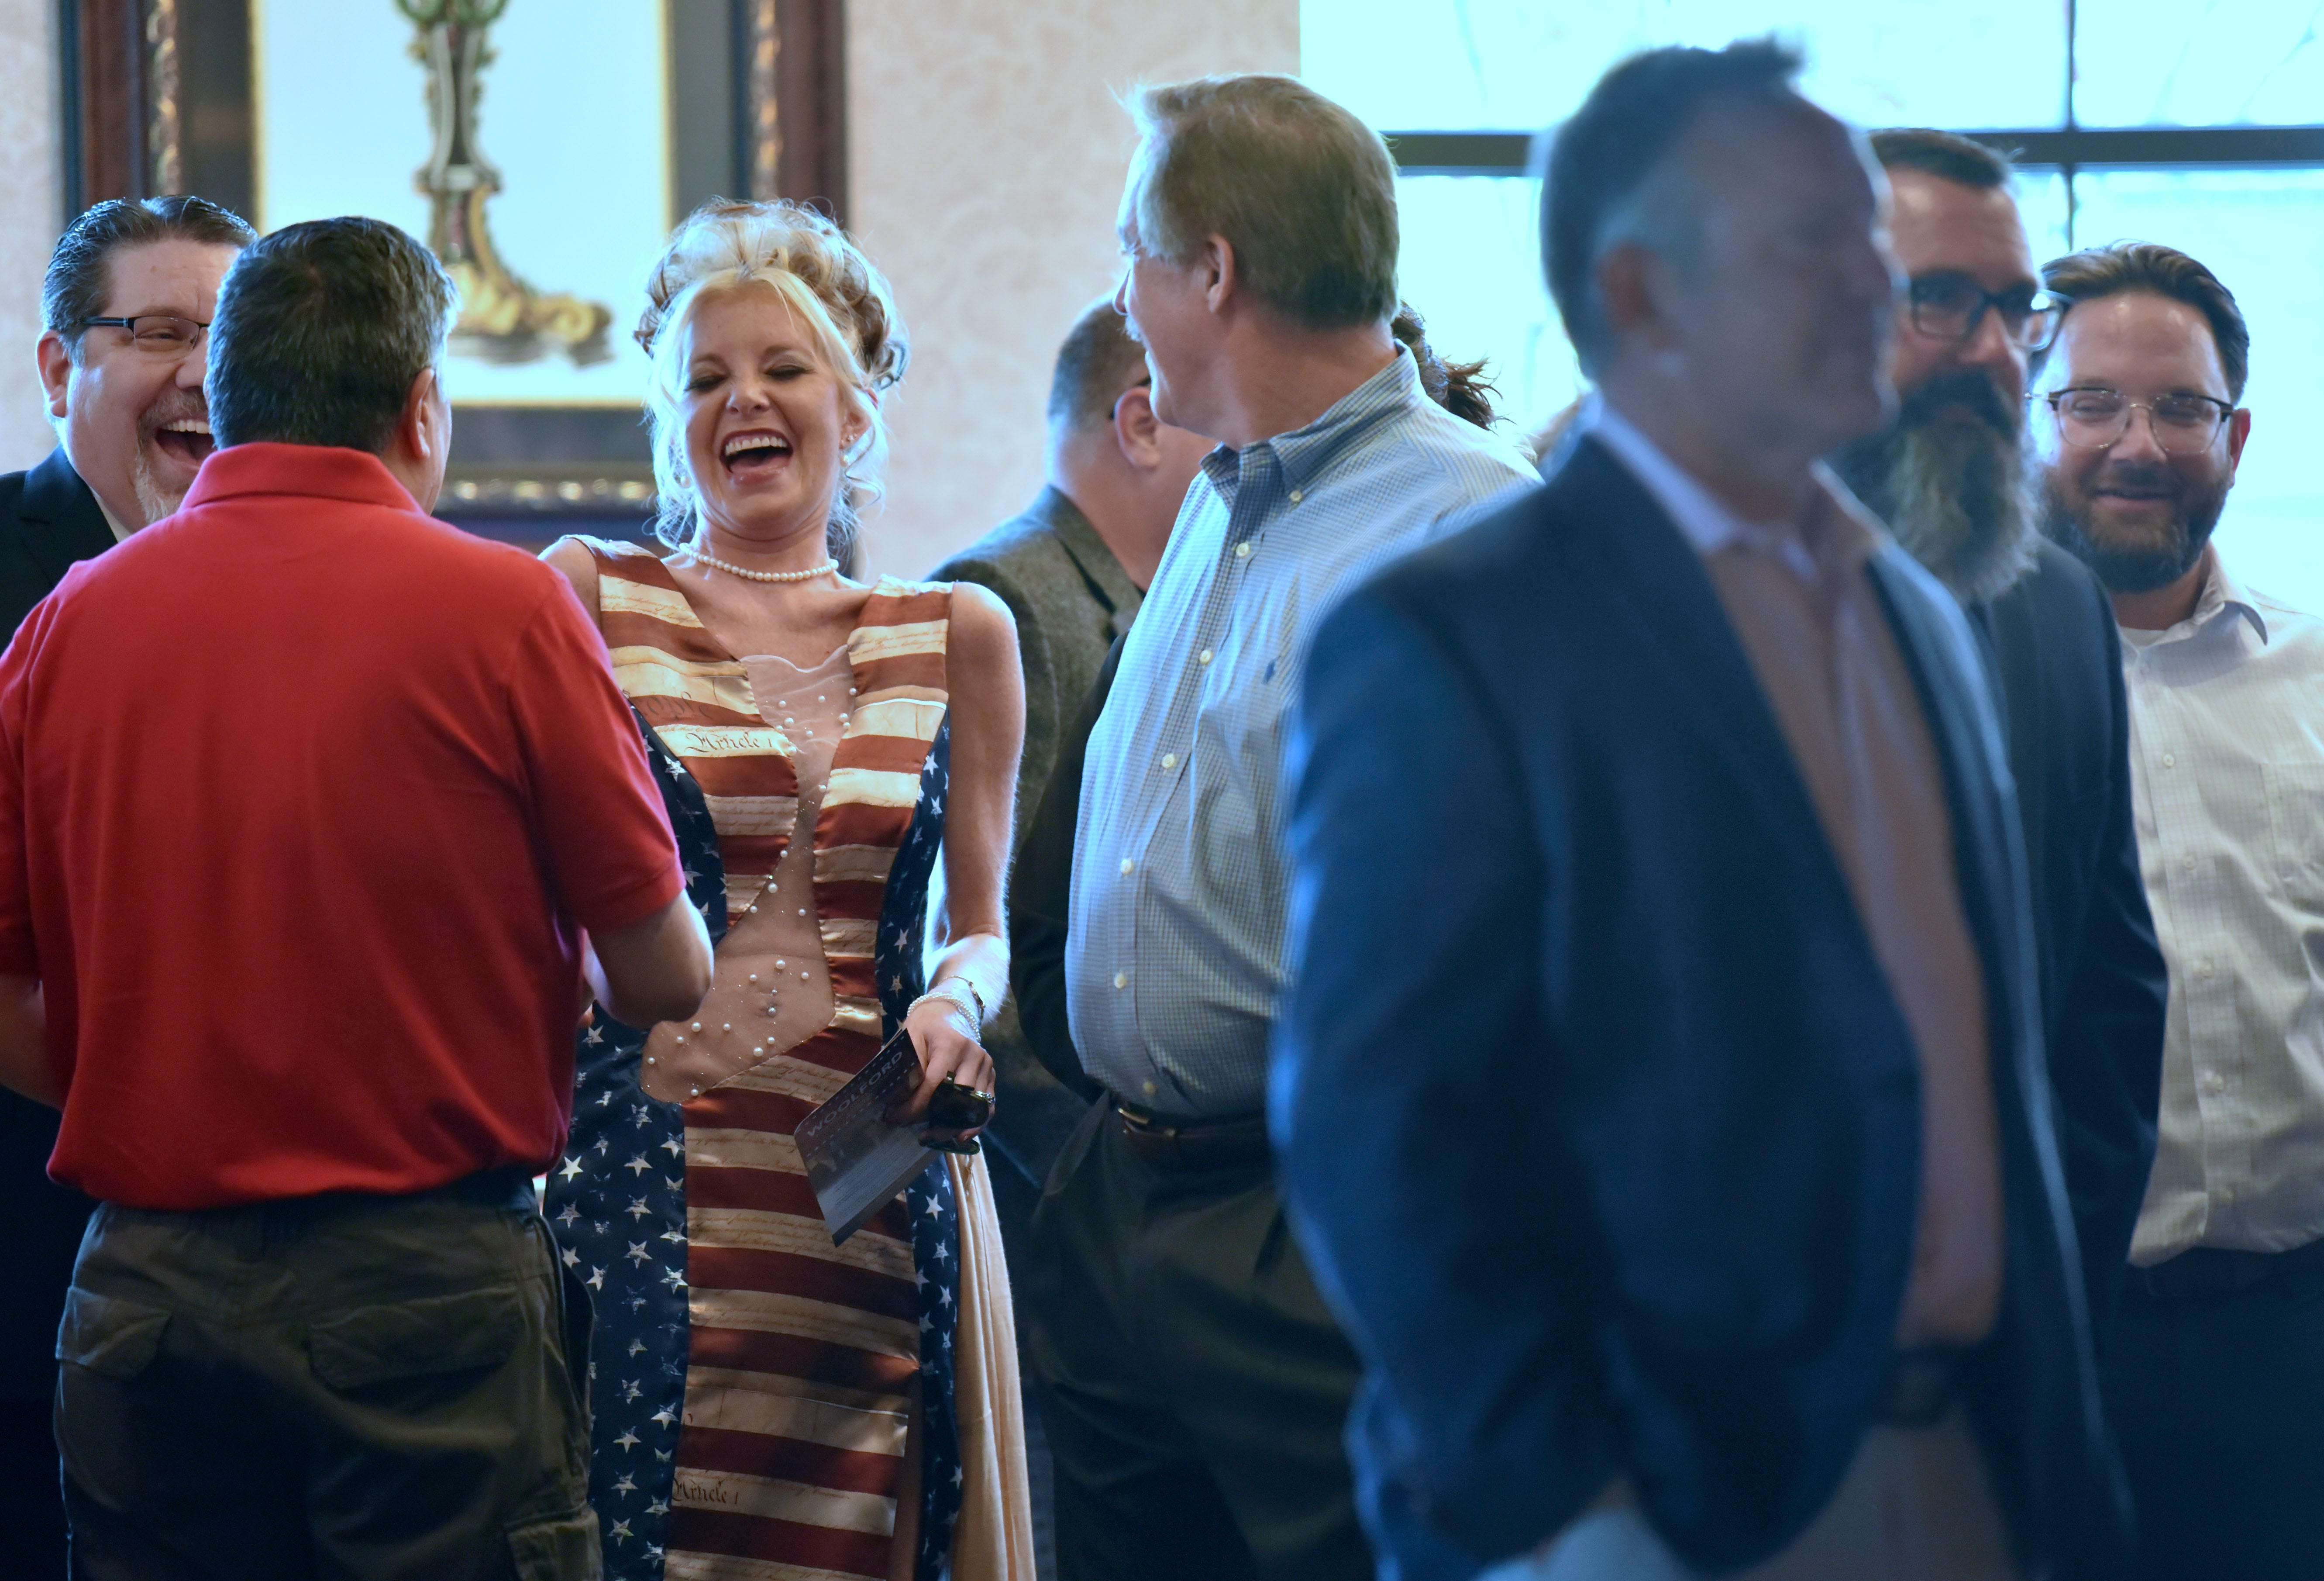 2APatroit.org co-founder (in Michigan) Anna-Marie Rodriguez-Pelizzari, third from right, of Brighton, shares a laugh with other before the debate begins, Thursday, May 12, 2022. 
The Livingston County Republican Party's 2022 Lincoln Day Dinner features the First Official GOP Gubernatorial Debate at Crystal Gardens Event and Banquet Center in Howell, Thursday night, May 12, 2022.